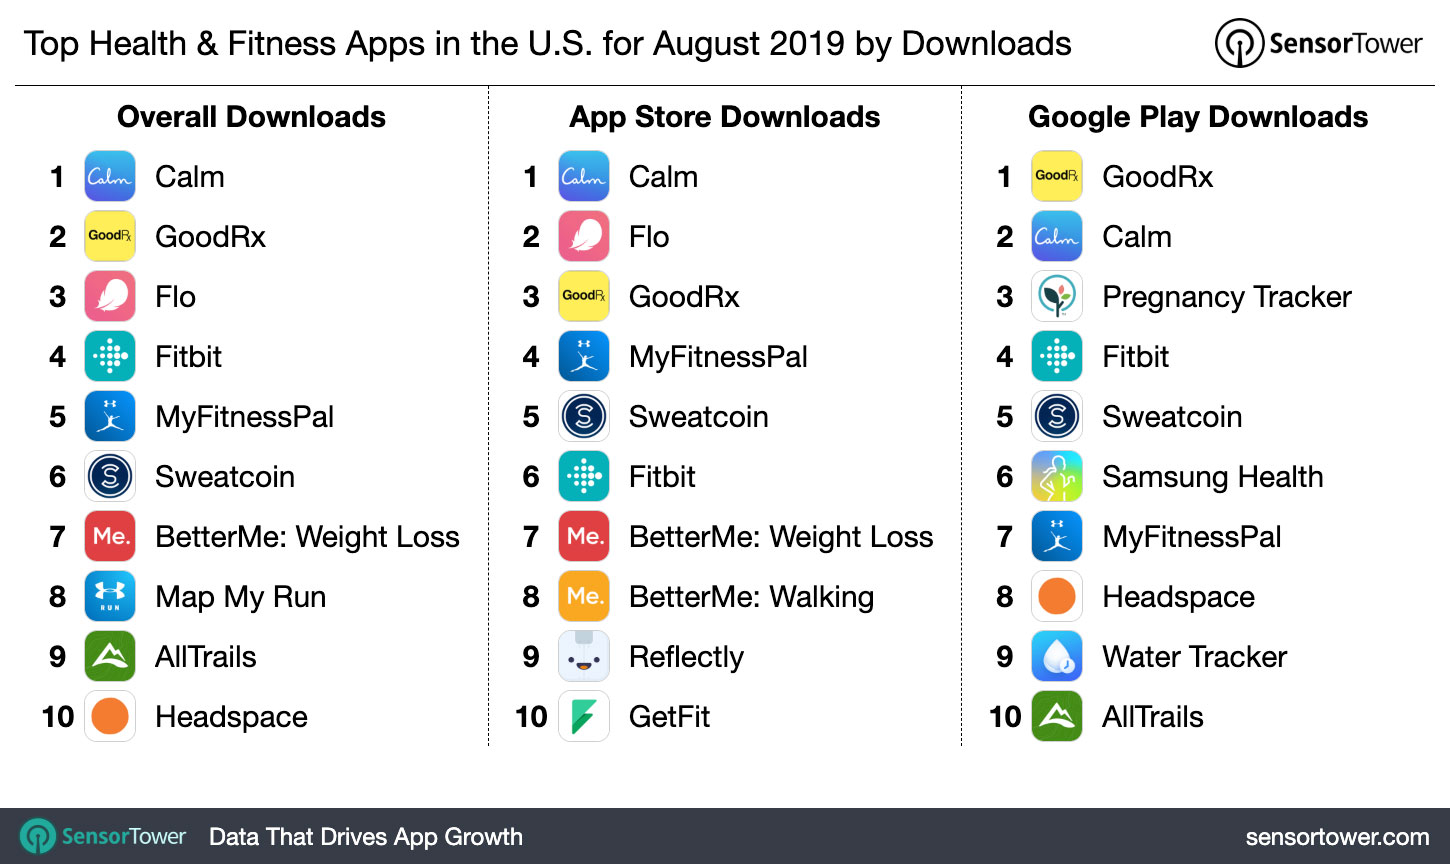 Top Health & Fitness Apps in the U.S. for August 2019 by Downloads